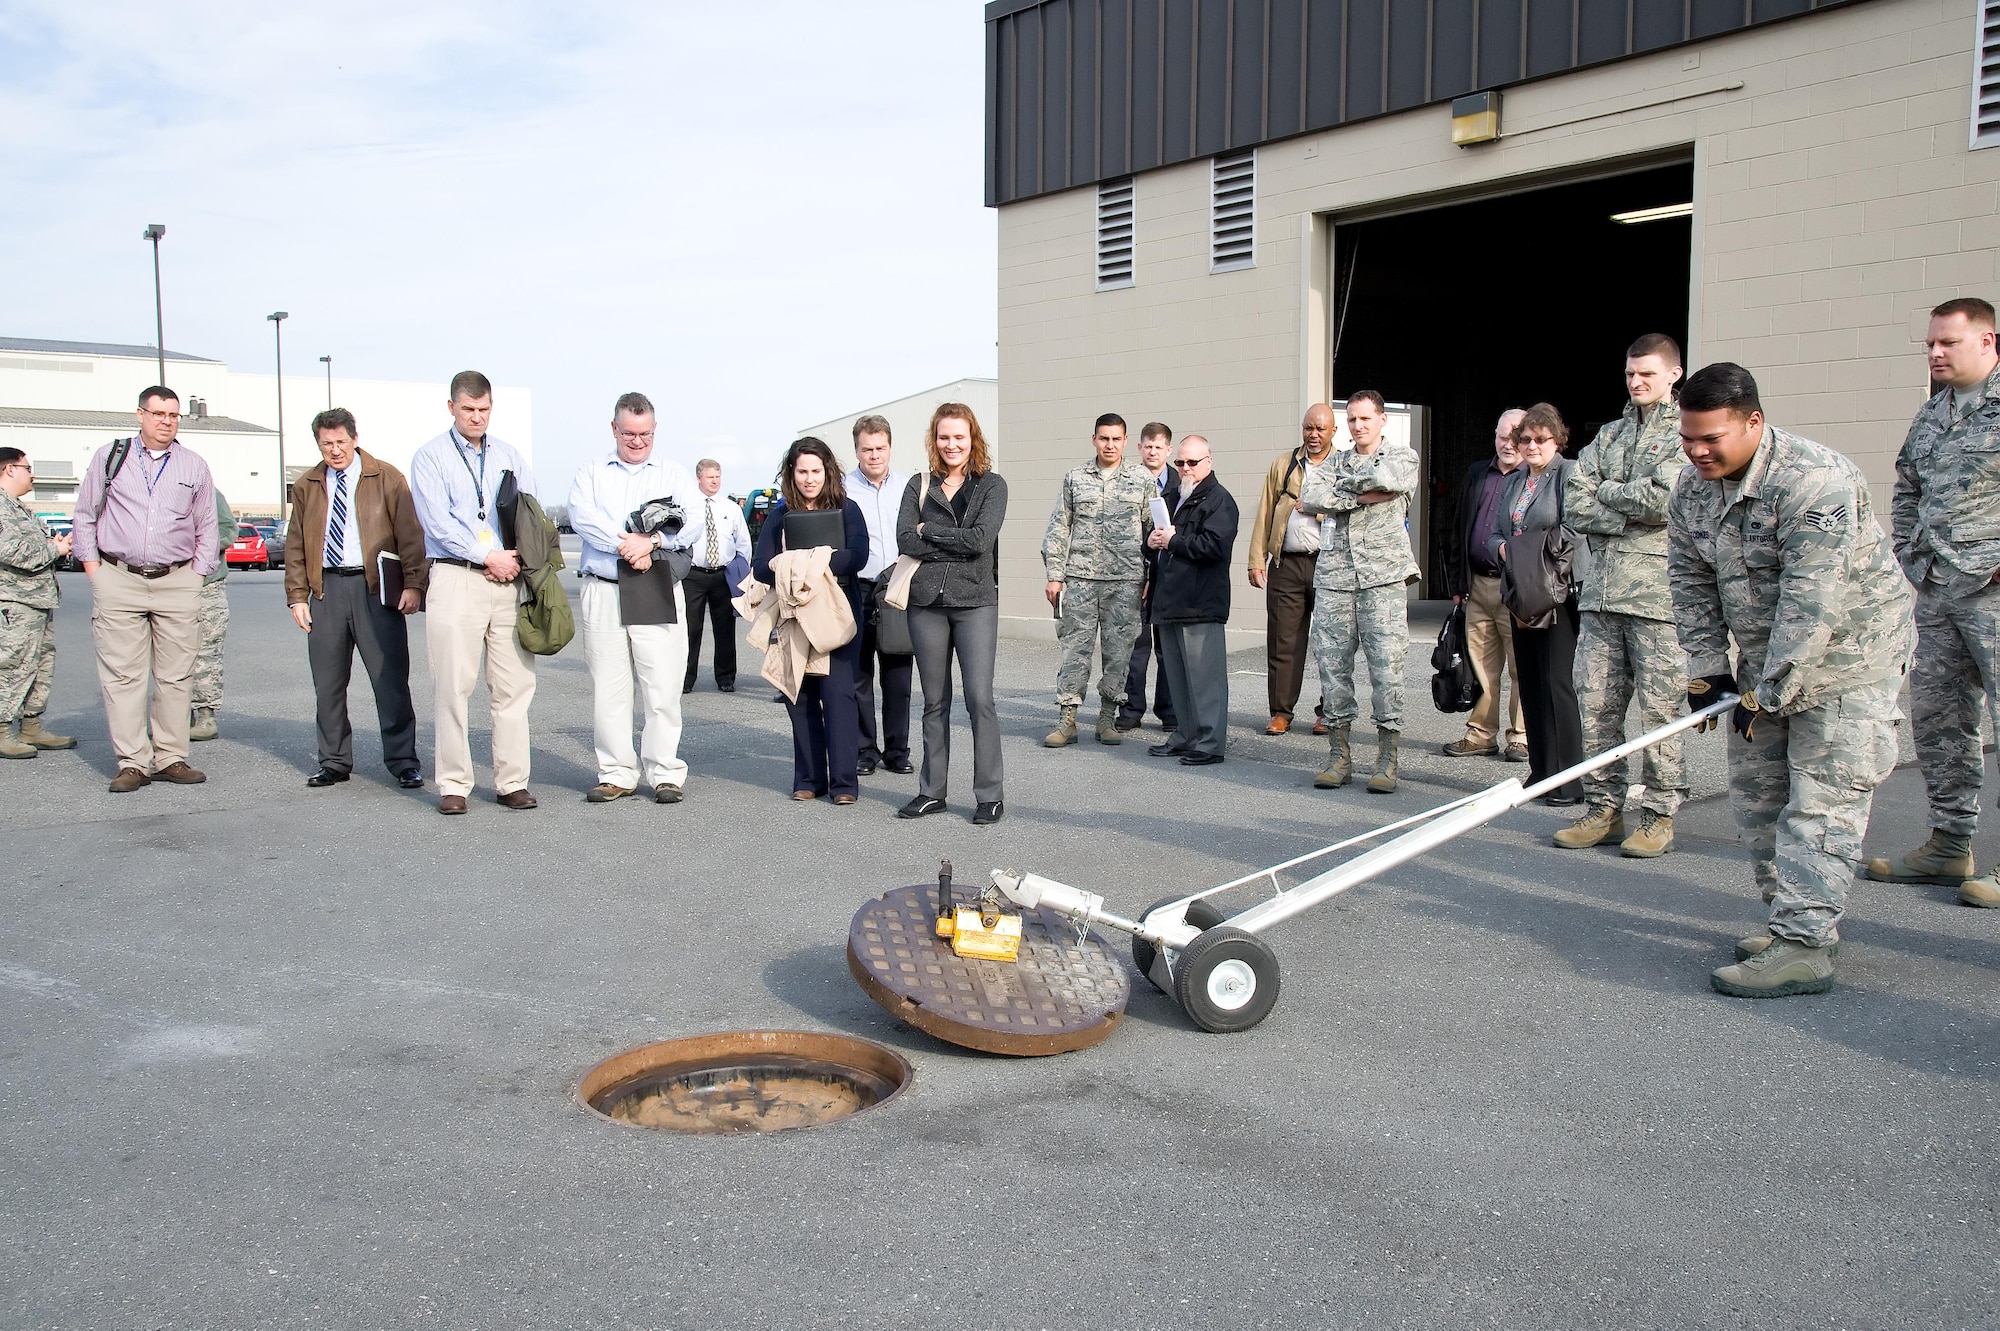 Senior Airman Octavious Tookes, 436th Aerial Port Squadron fleet service specialist, uses a magnetic lift to remove a sewer cover Feb. 8, 2017, at Dover Air Force Base, Del. Tookes showed members of Air Mobility Command’s “Aerial Port of the Future” study team from Scott Air Force Base, Ill., how the lift is used to remove the cover prior to an aircraft lavatory service truck emptying its holding tank back in the APS compound. (U.S. Air Force photo by Roland Balik)